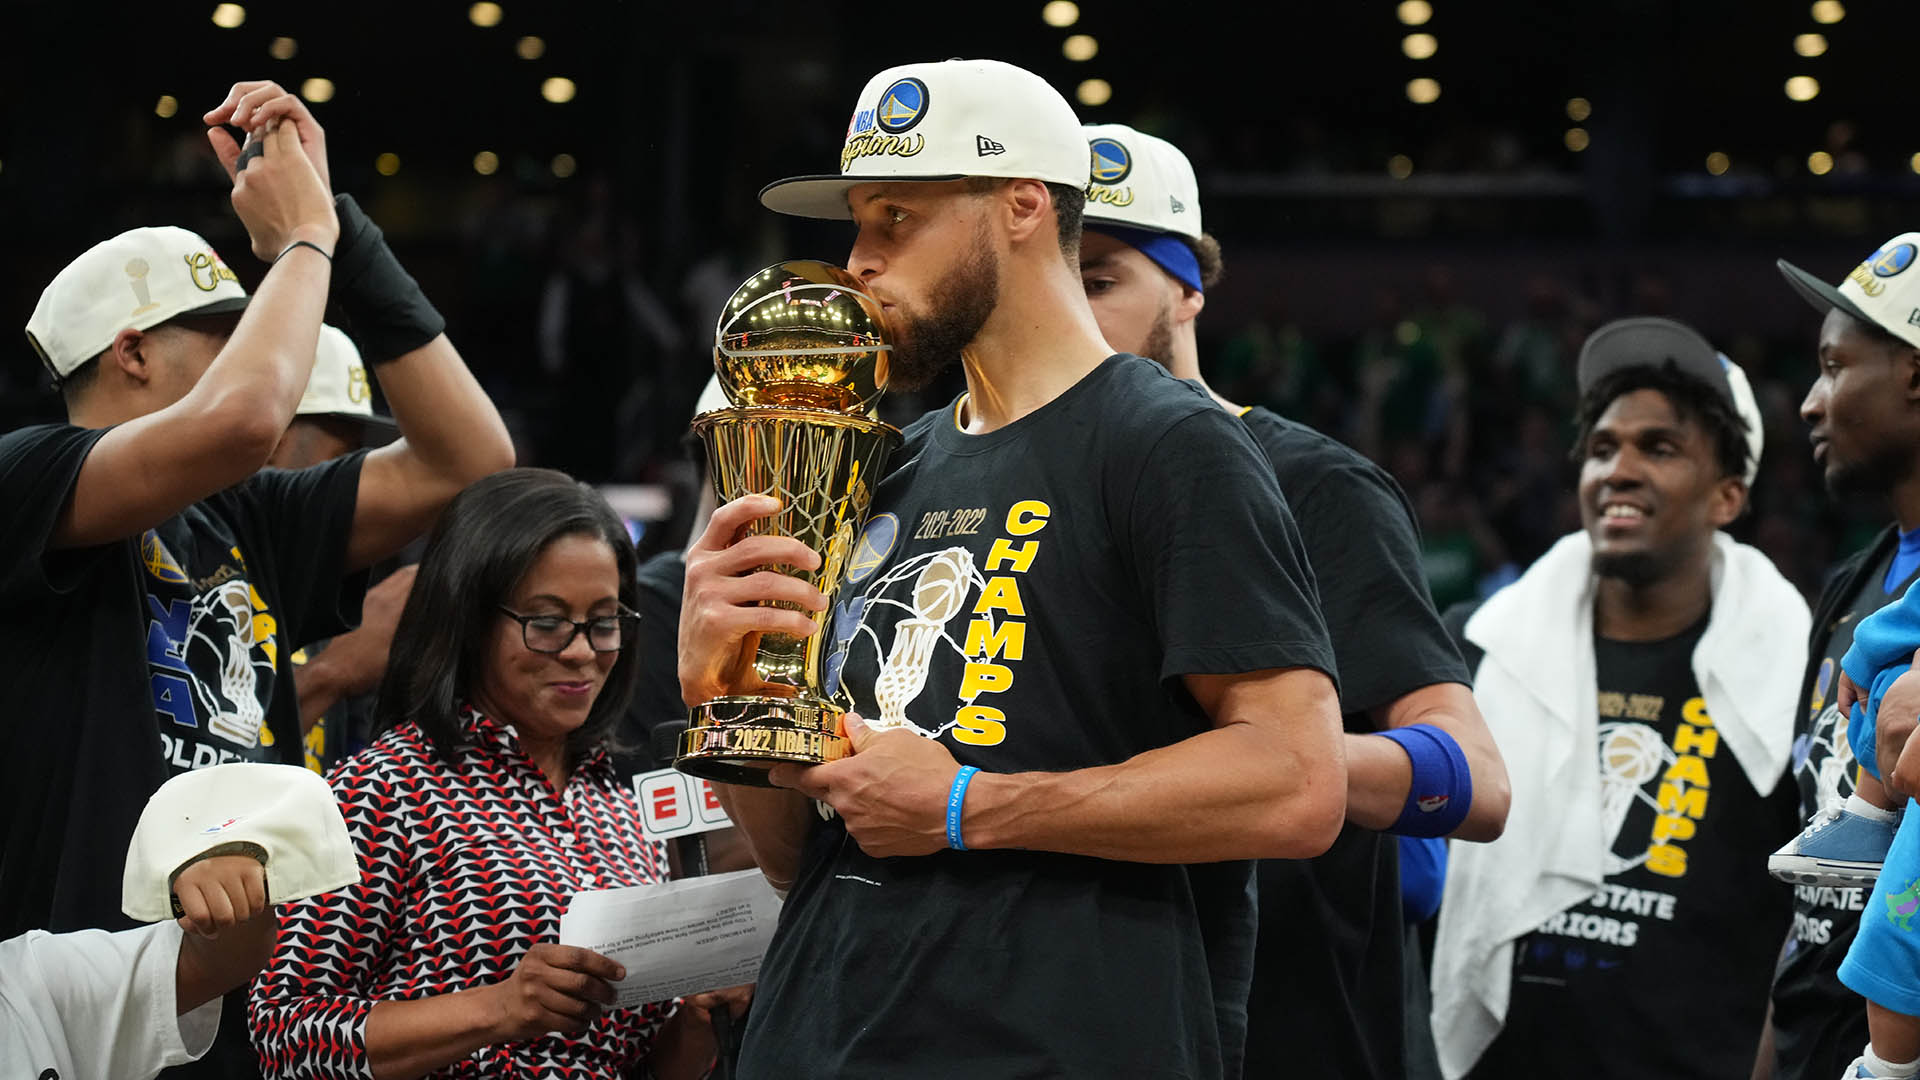 NBA Finals MVP Ladder: Stephen Curry finishes at top as Warriors take title